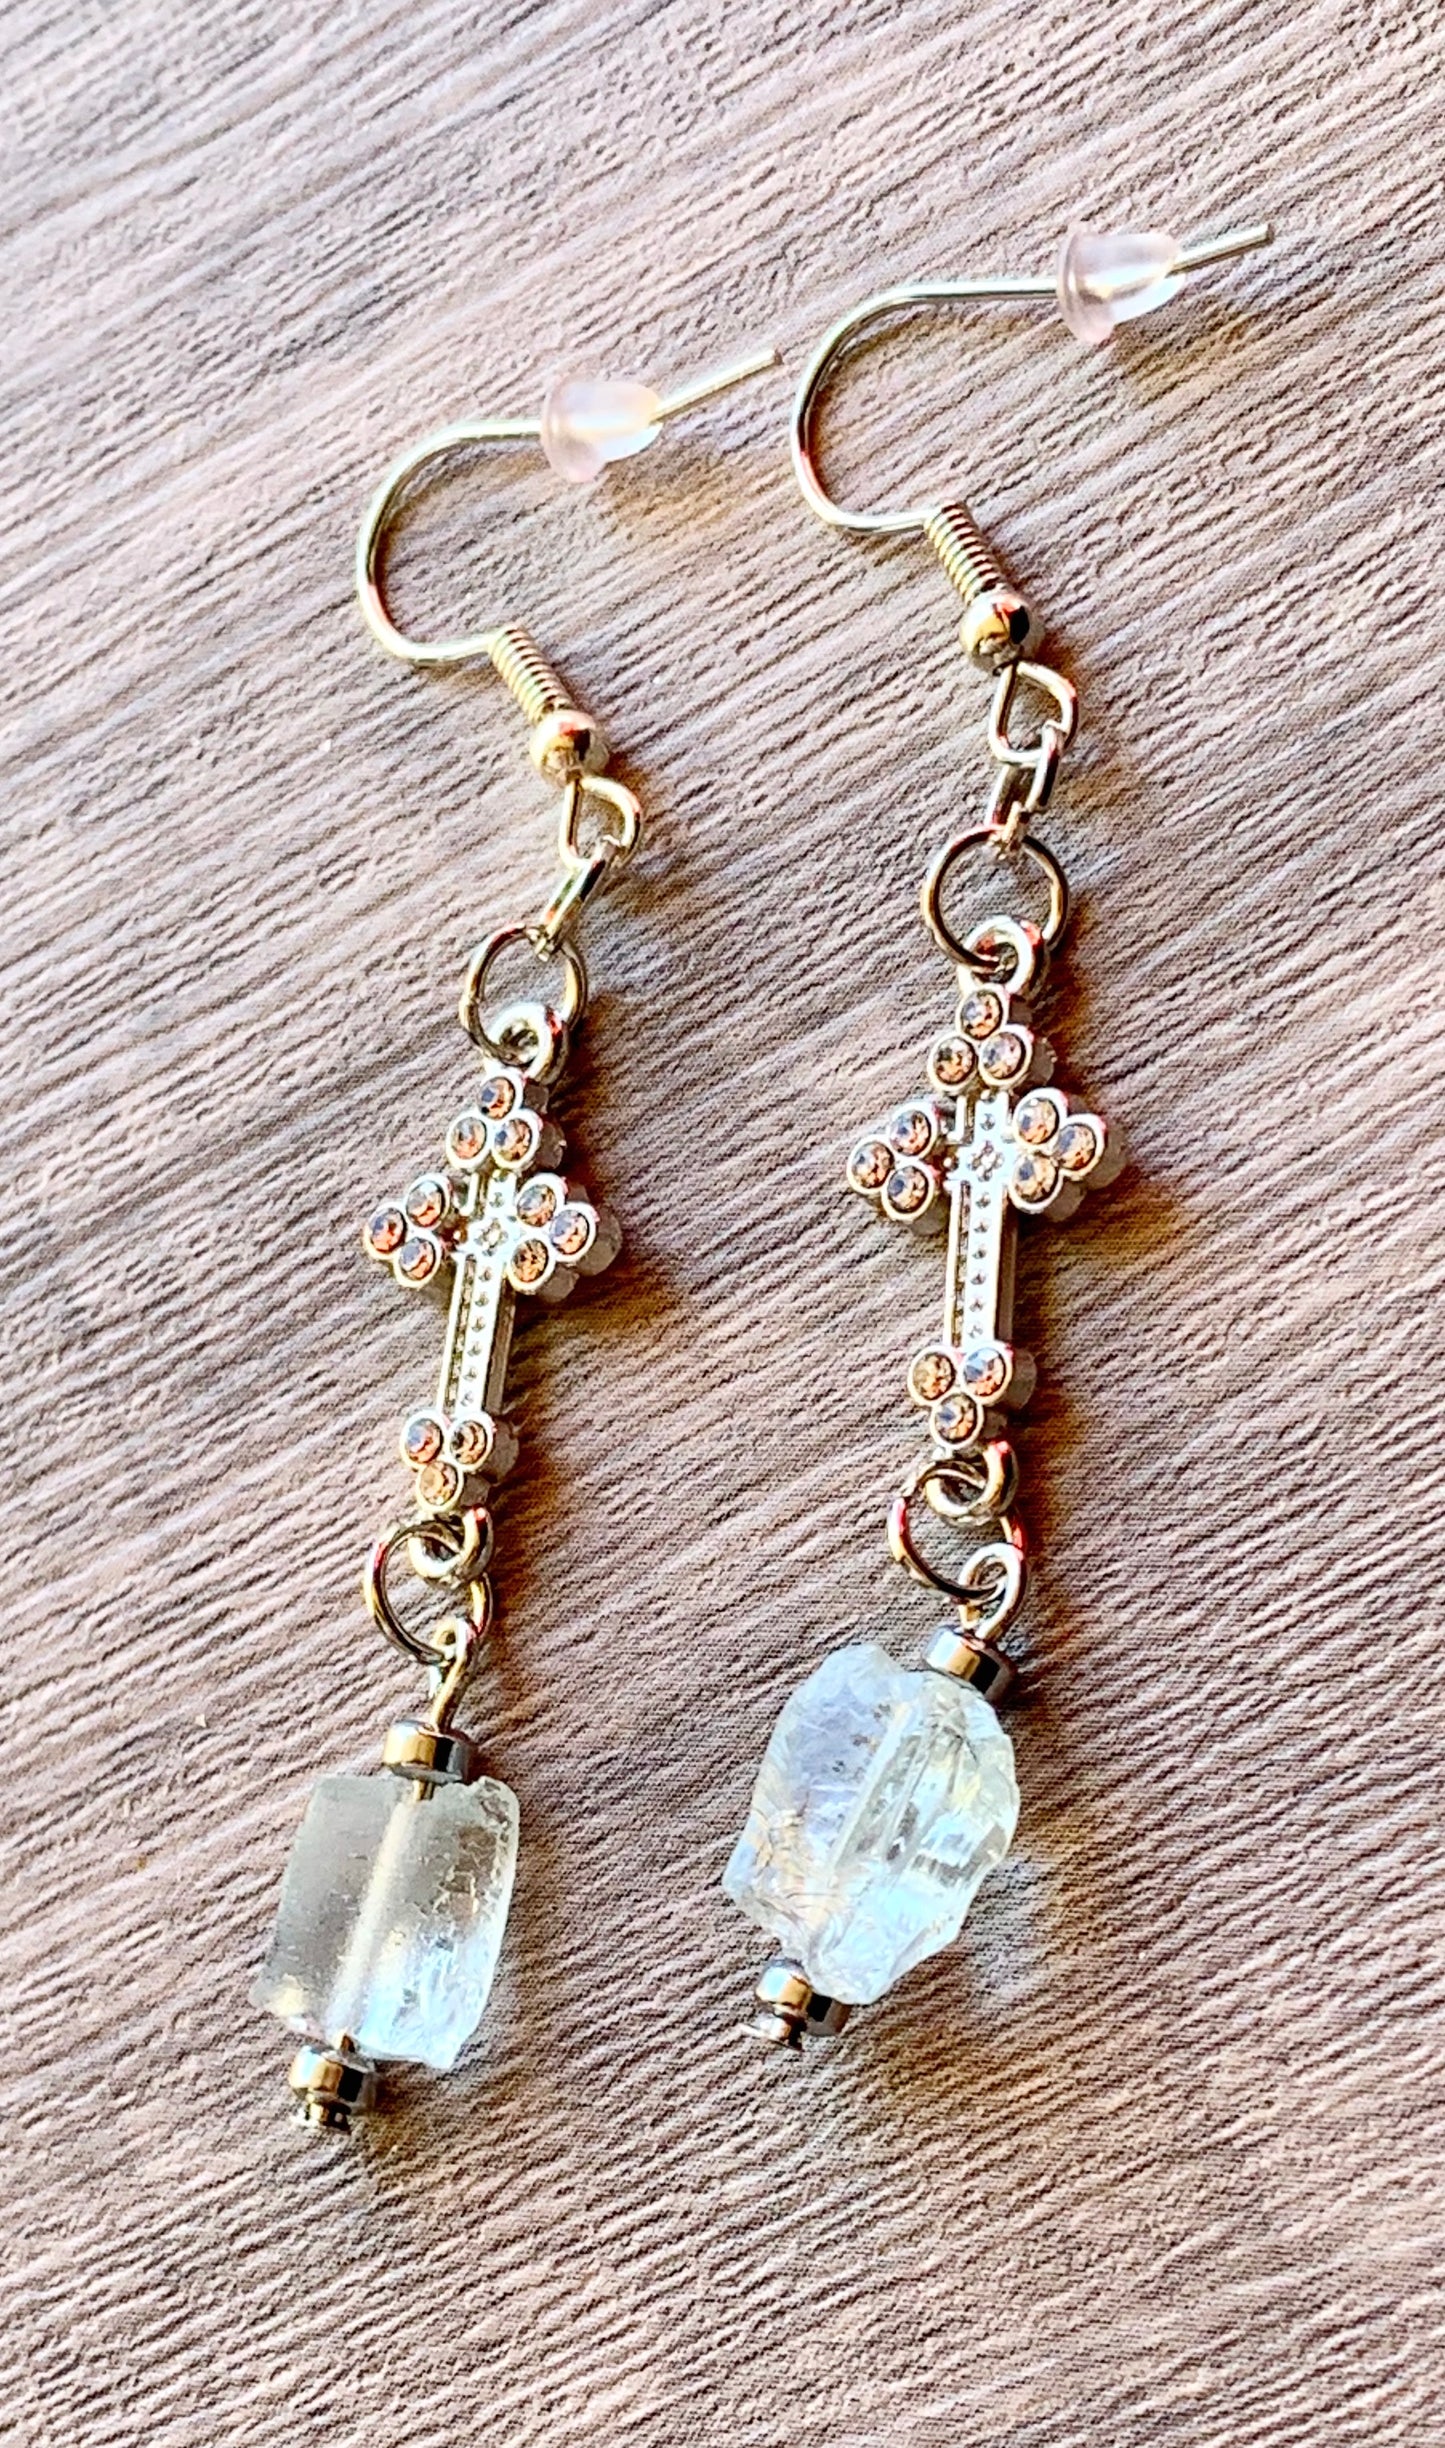 Linore Handmade Raw Light Blue Topaz and Silver Plated Hematite Earrings with a Rhinestone Cross